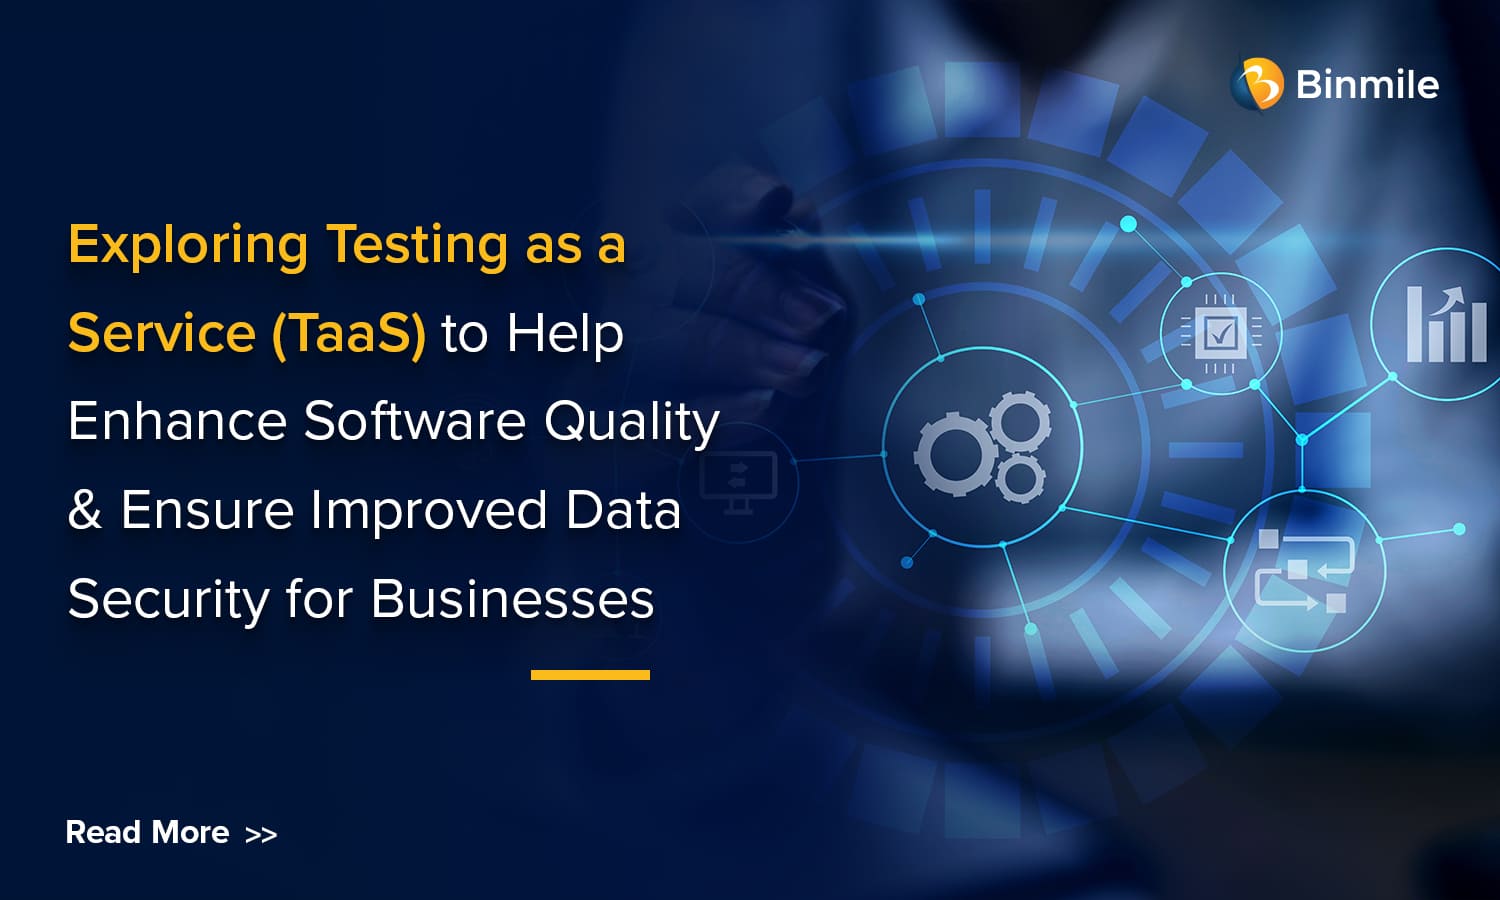 Testing as a Service: Find the Best Way To Test Applications